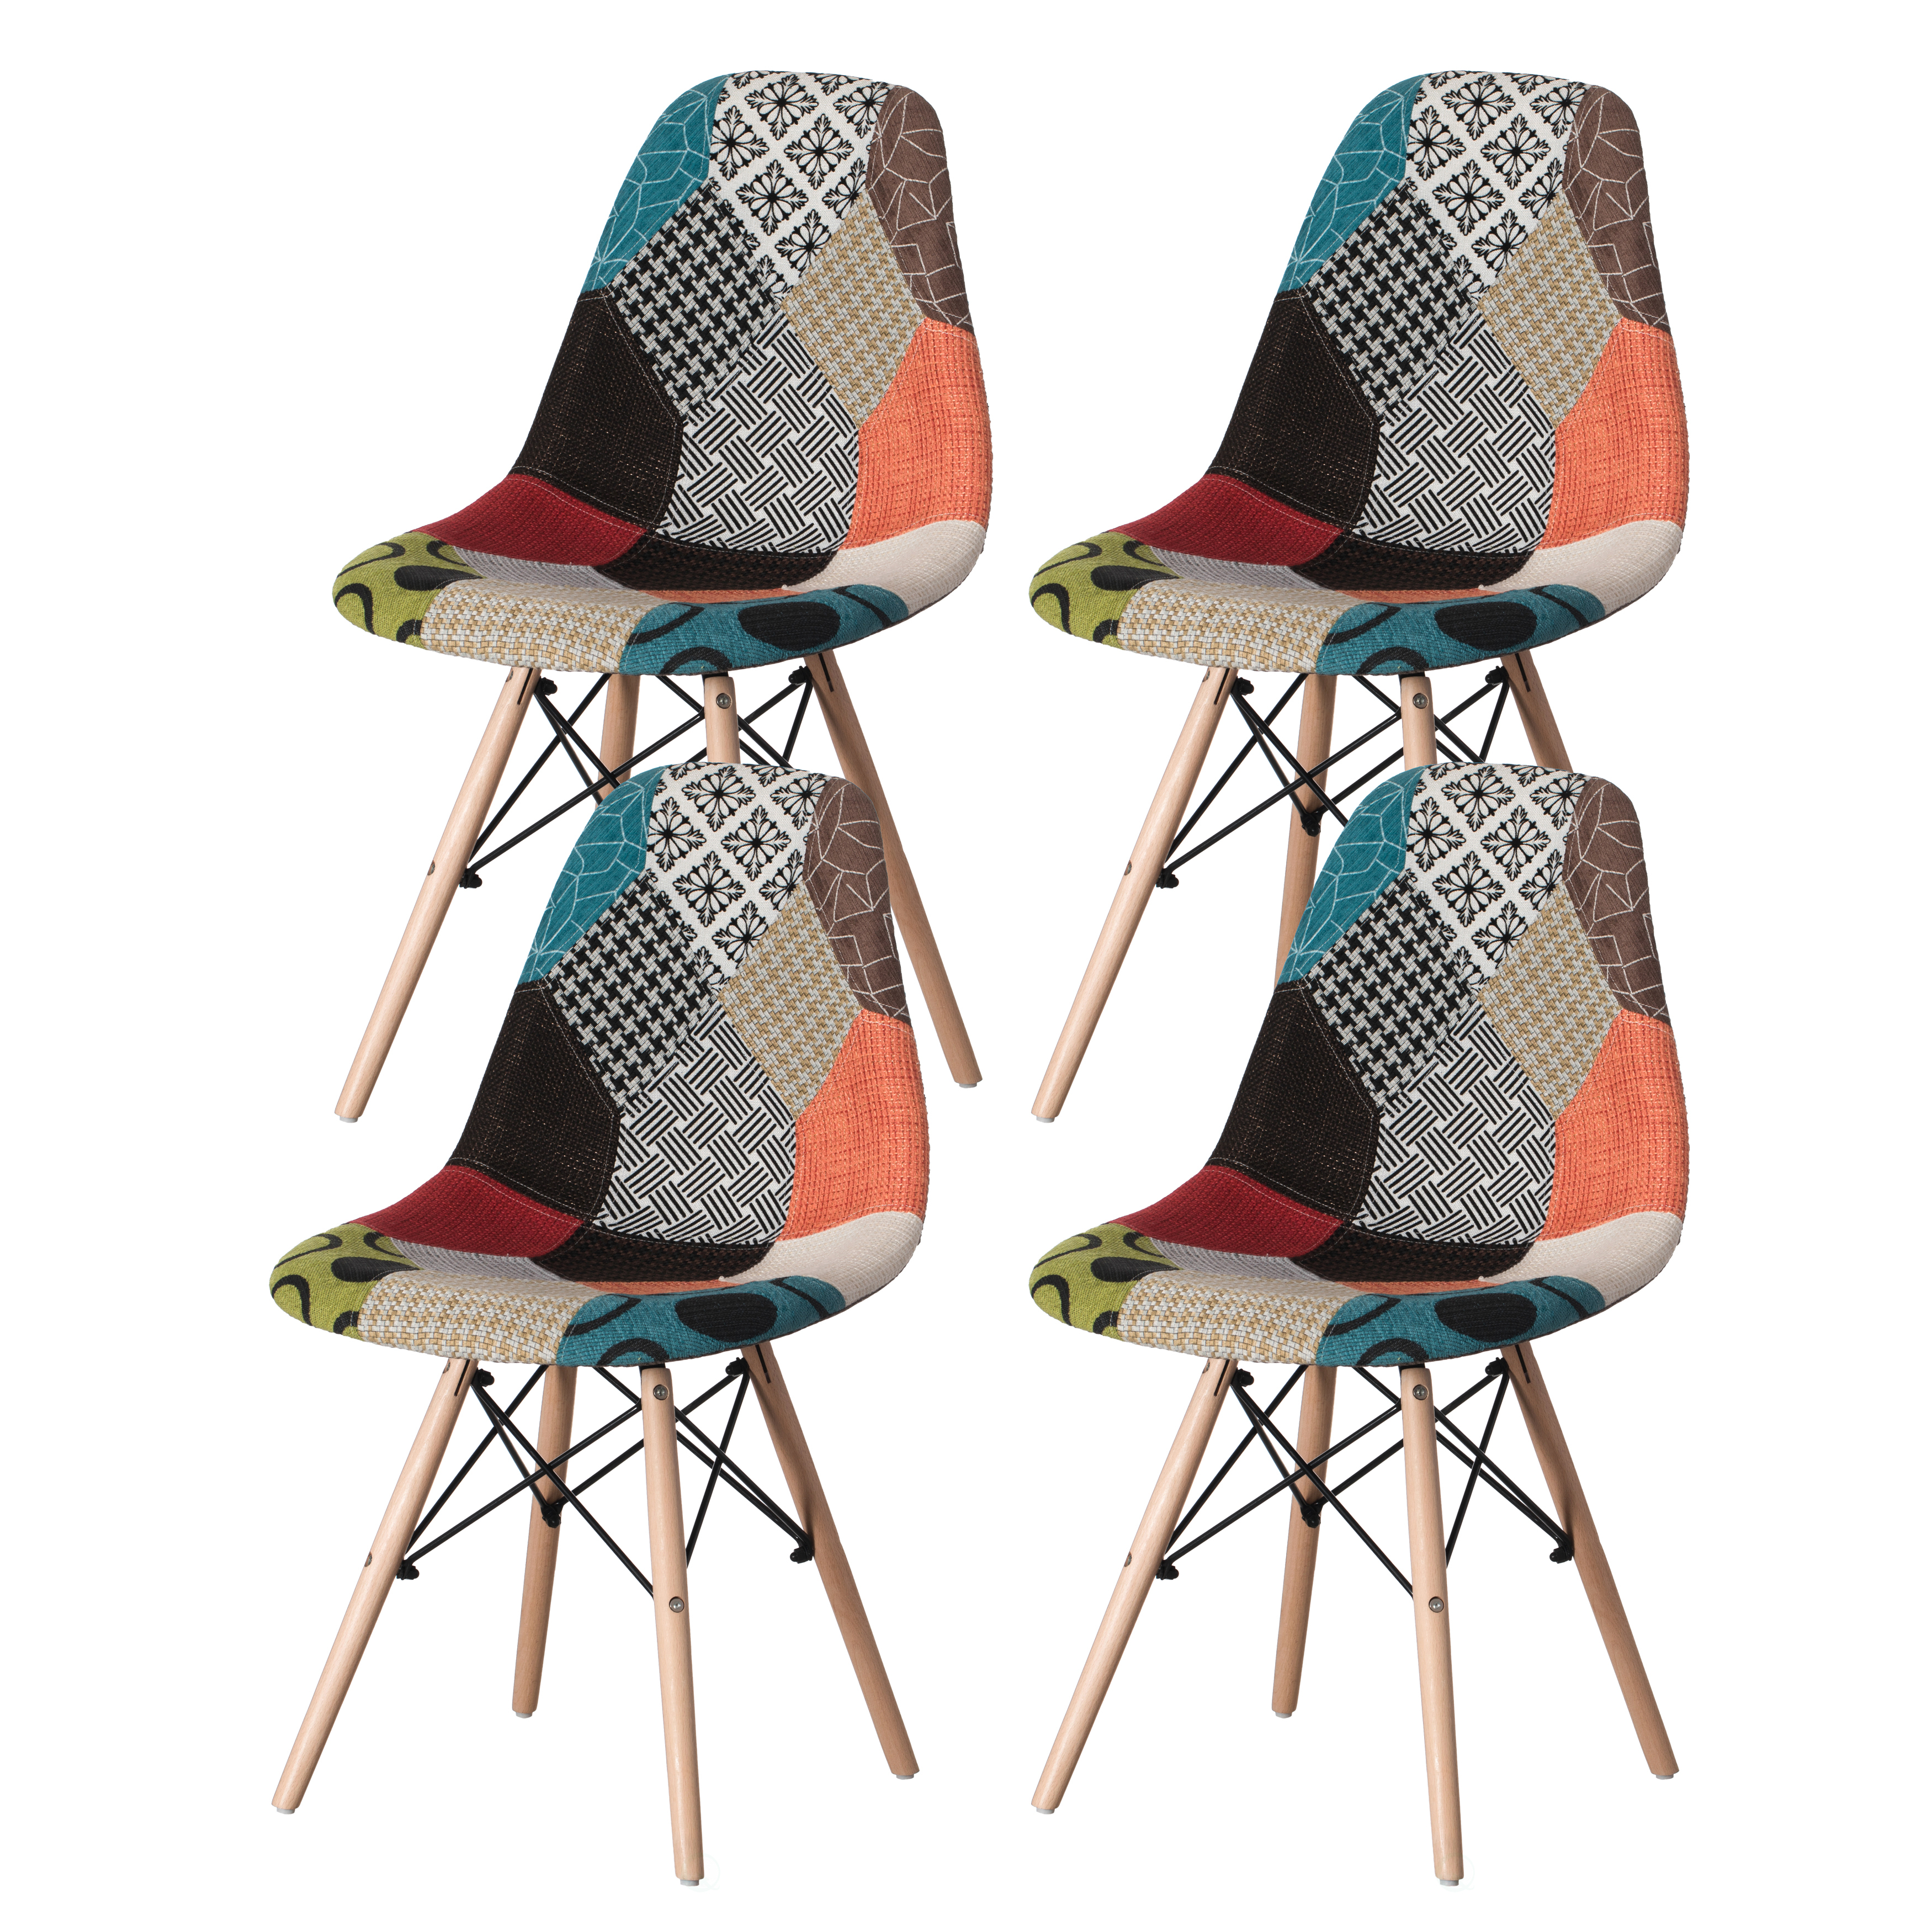 Modern Fabric Patchwork Chair With Wooden Legs For Kitchen, Dining Room, Entryway, Living Room - Set Of 4